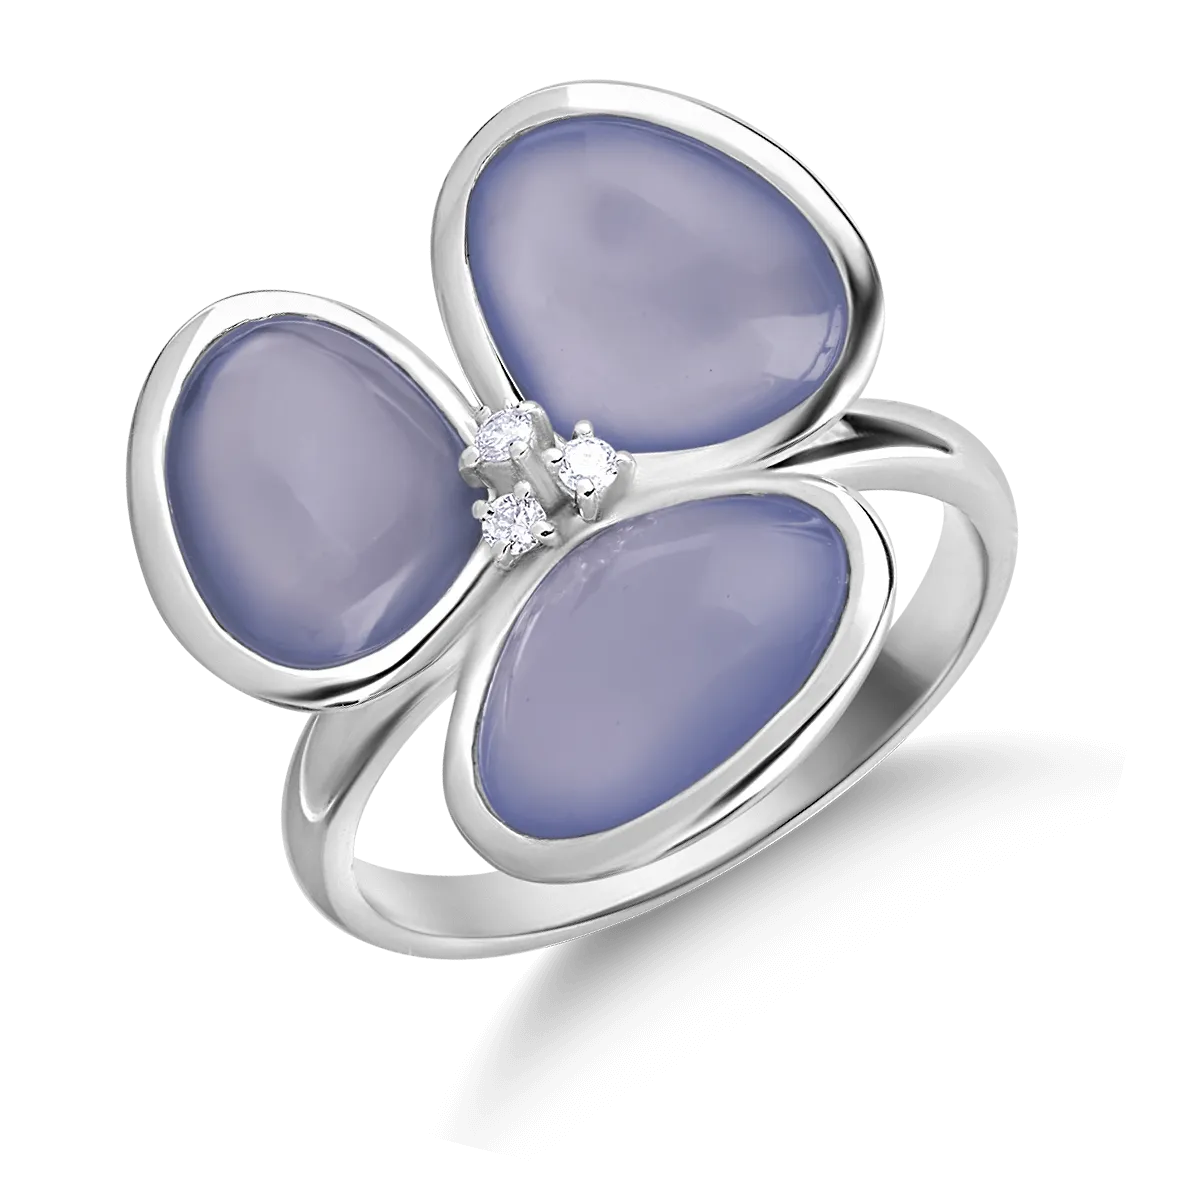 18K white gold ring with 7.27ct blue chalcedony and 0.04ct diamonds